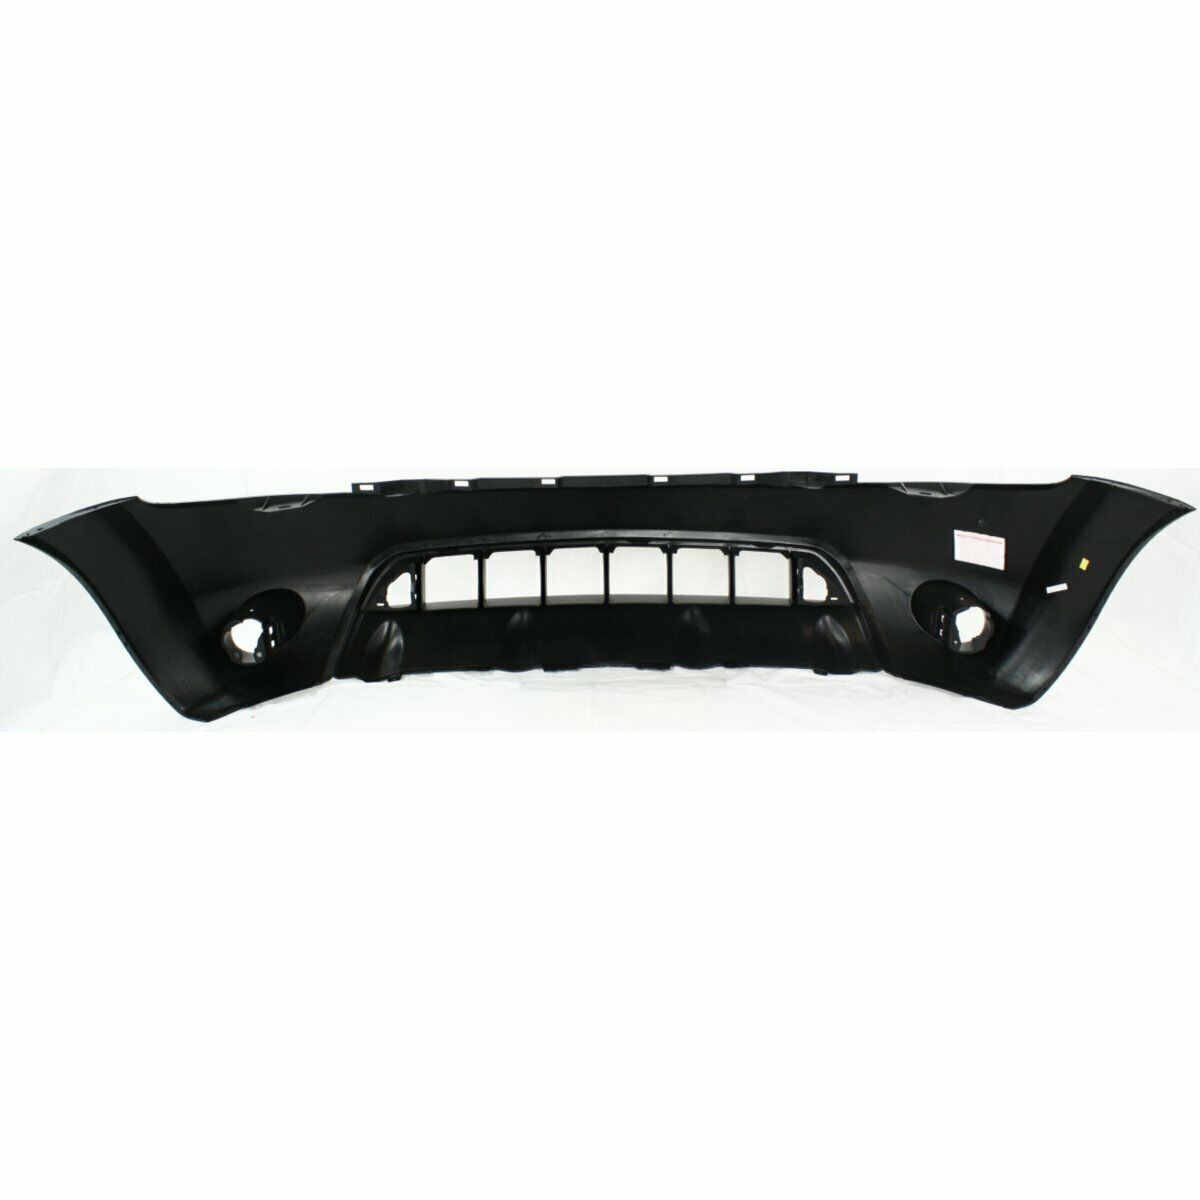 2003-2005 Nissan Murano SUV Front Bumper Painted to Match